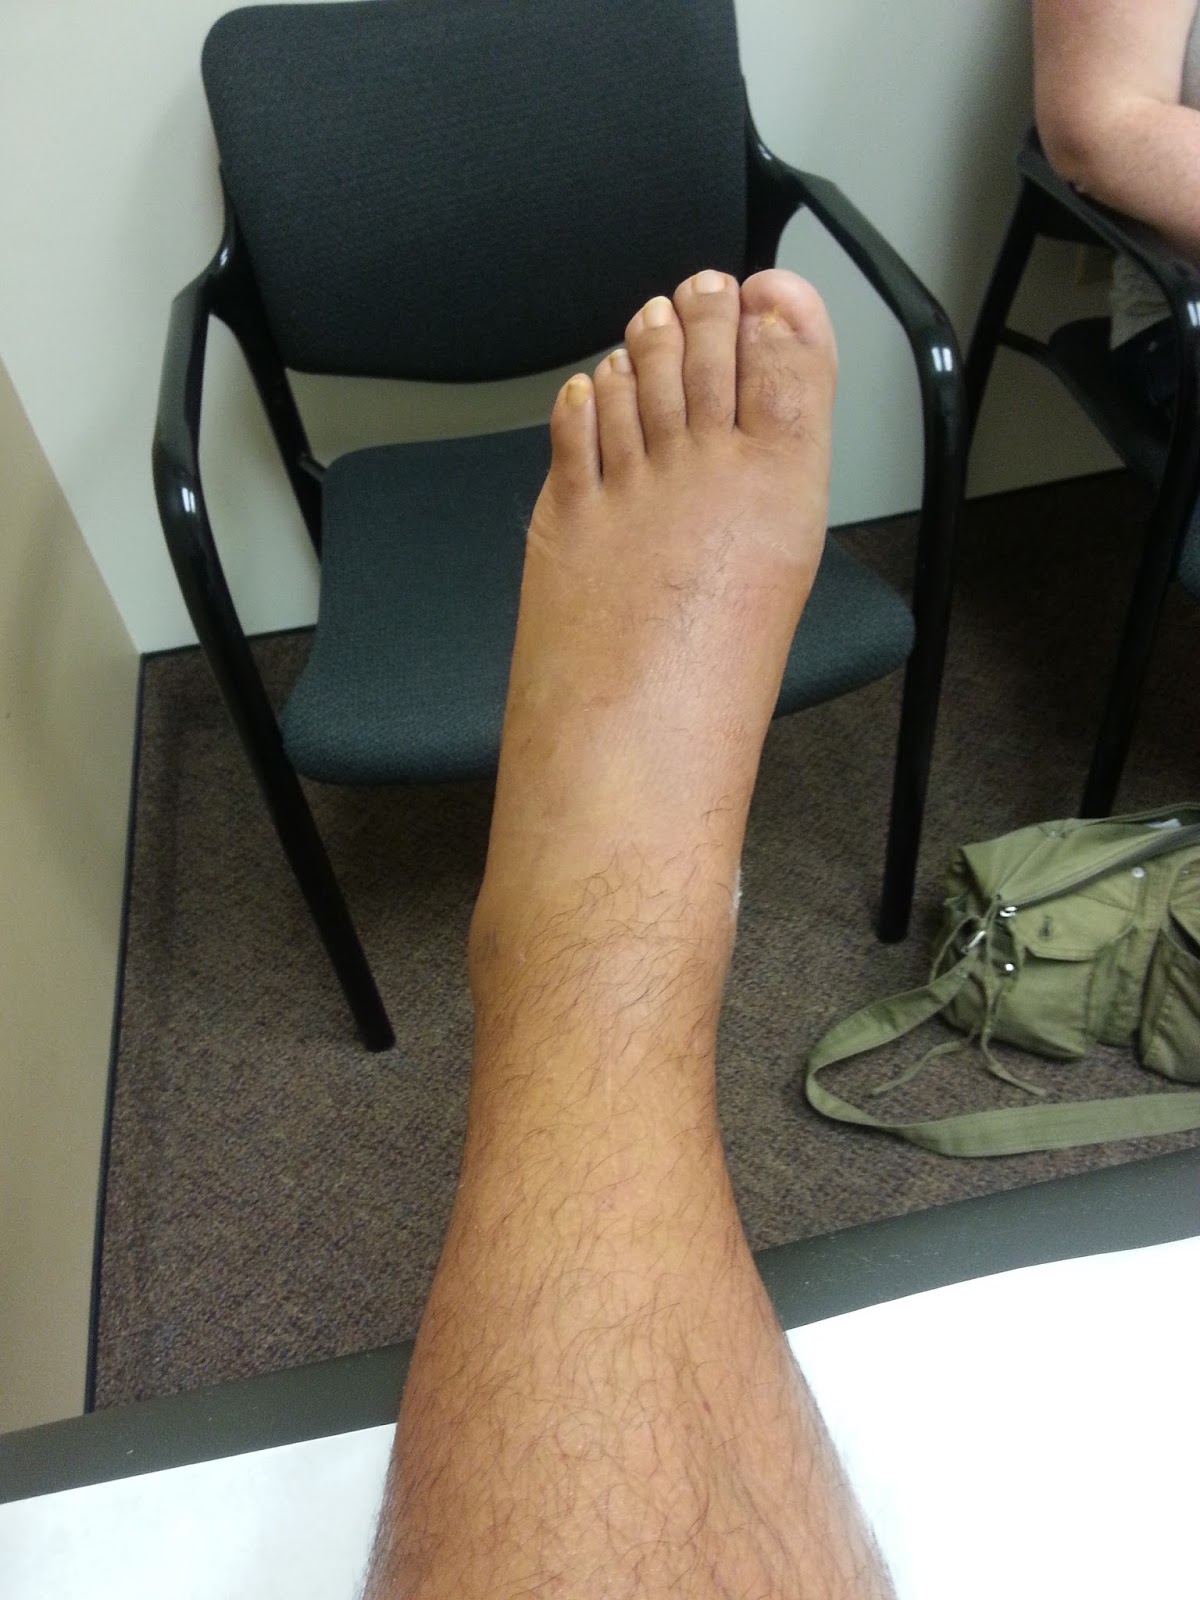 Peroneal Tendon Surgery Recovery Week 2 First PostOp Visit